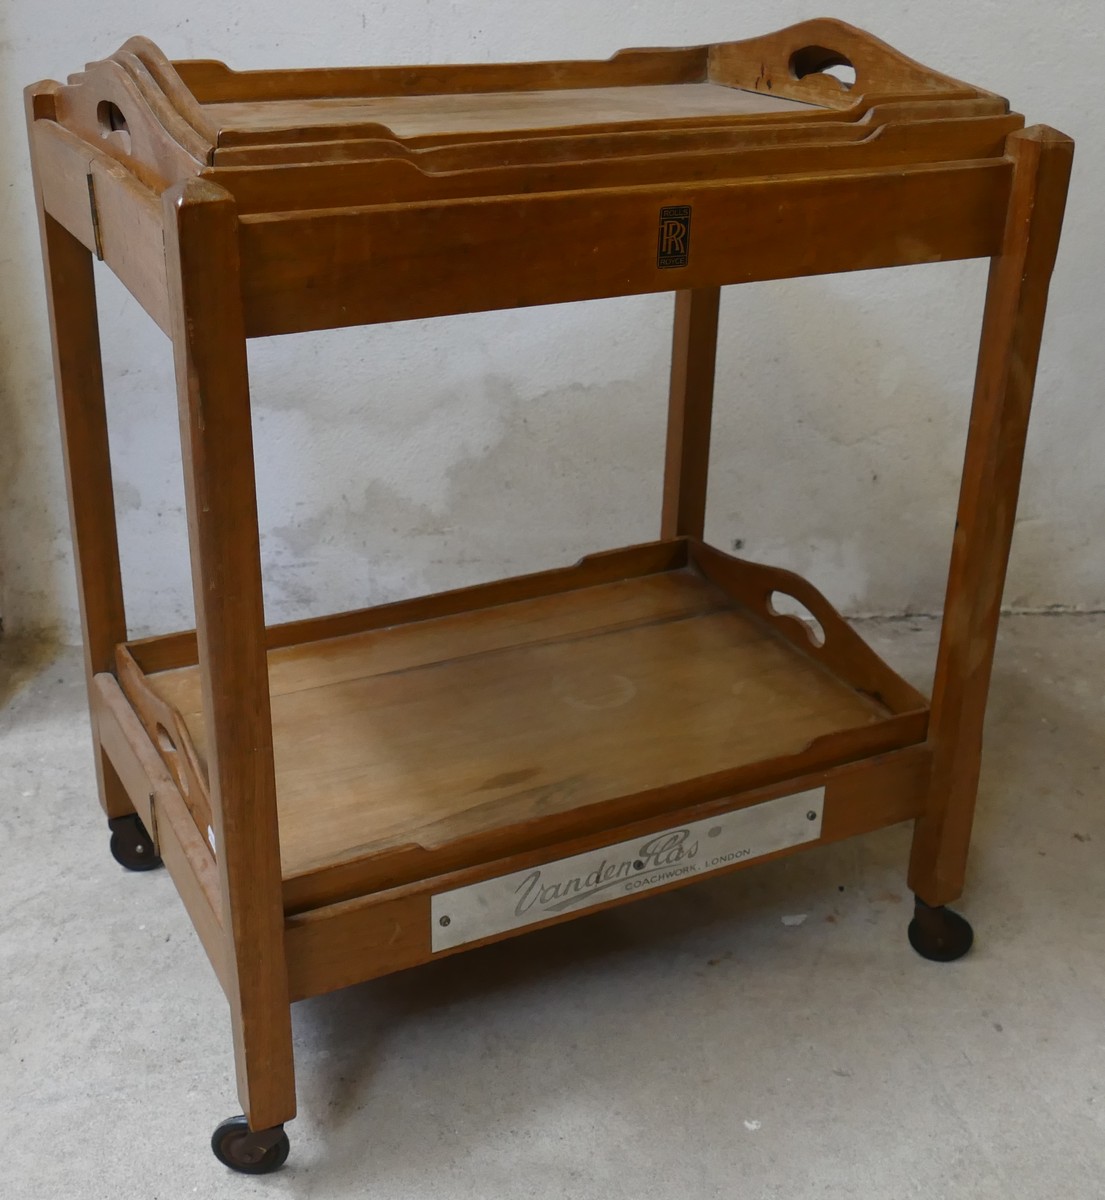 Vanden Plas for Rolls Royce, a rare mahogany and walnut collapsible picnic trolley, with four